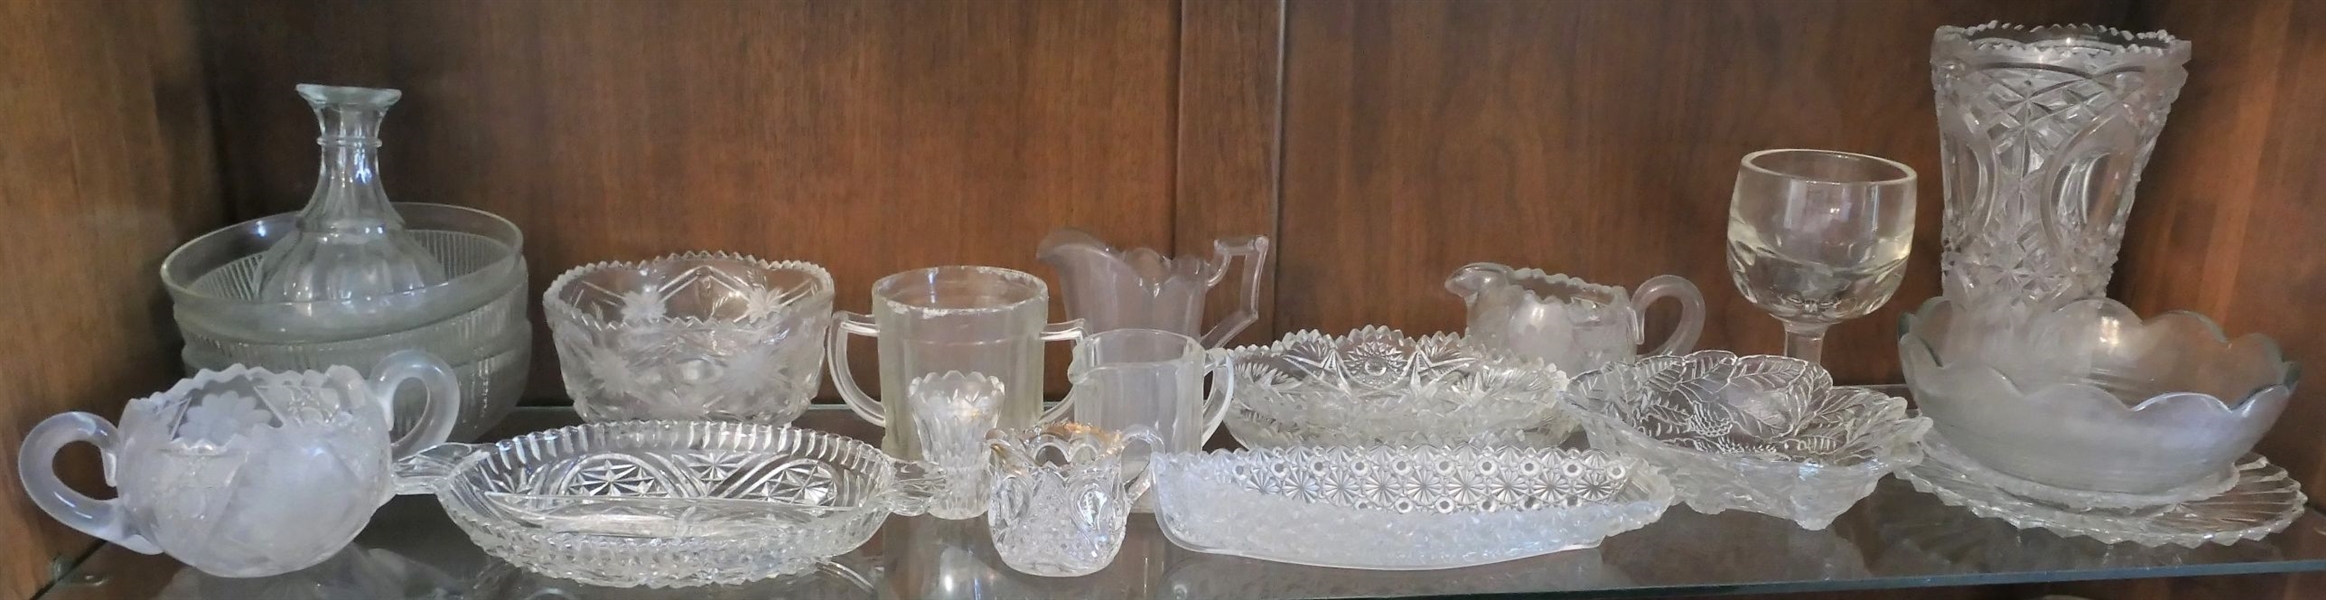 Lot of Early American Press Glass and Leaded Glass Pieces - Vase Measures 9" Tall Daisy and Button Boat Dish Measures 10" Long